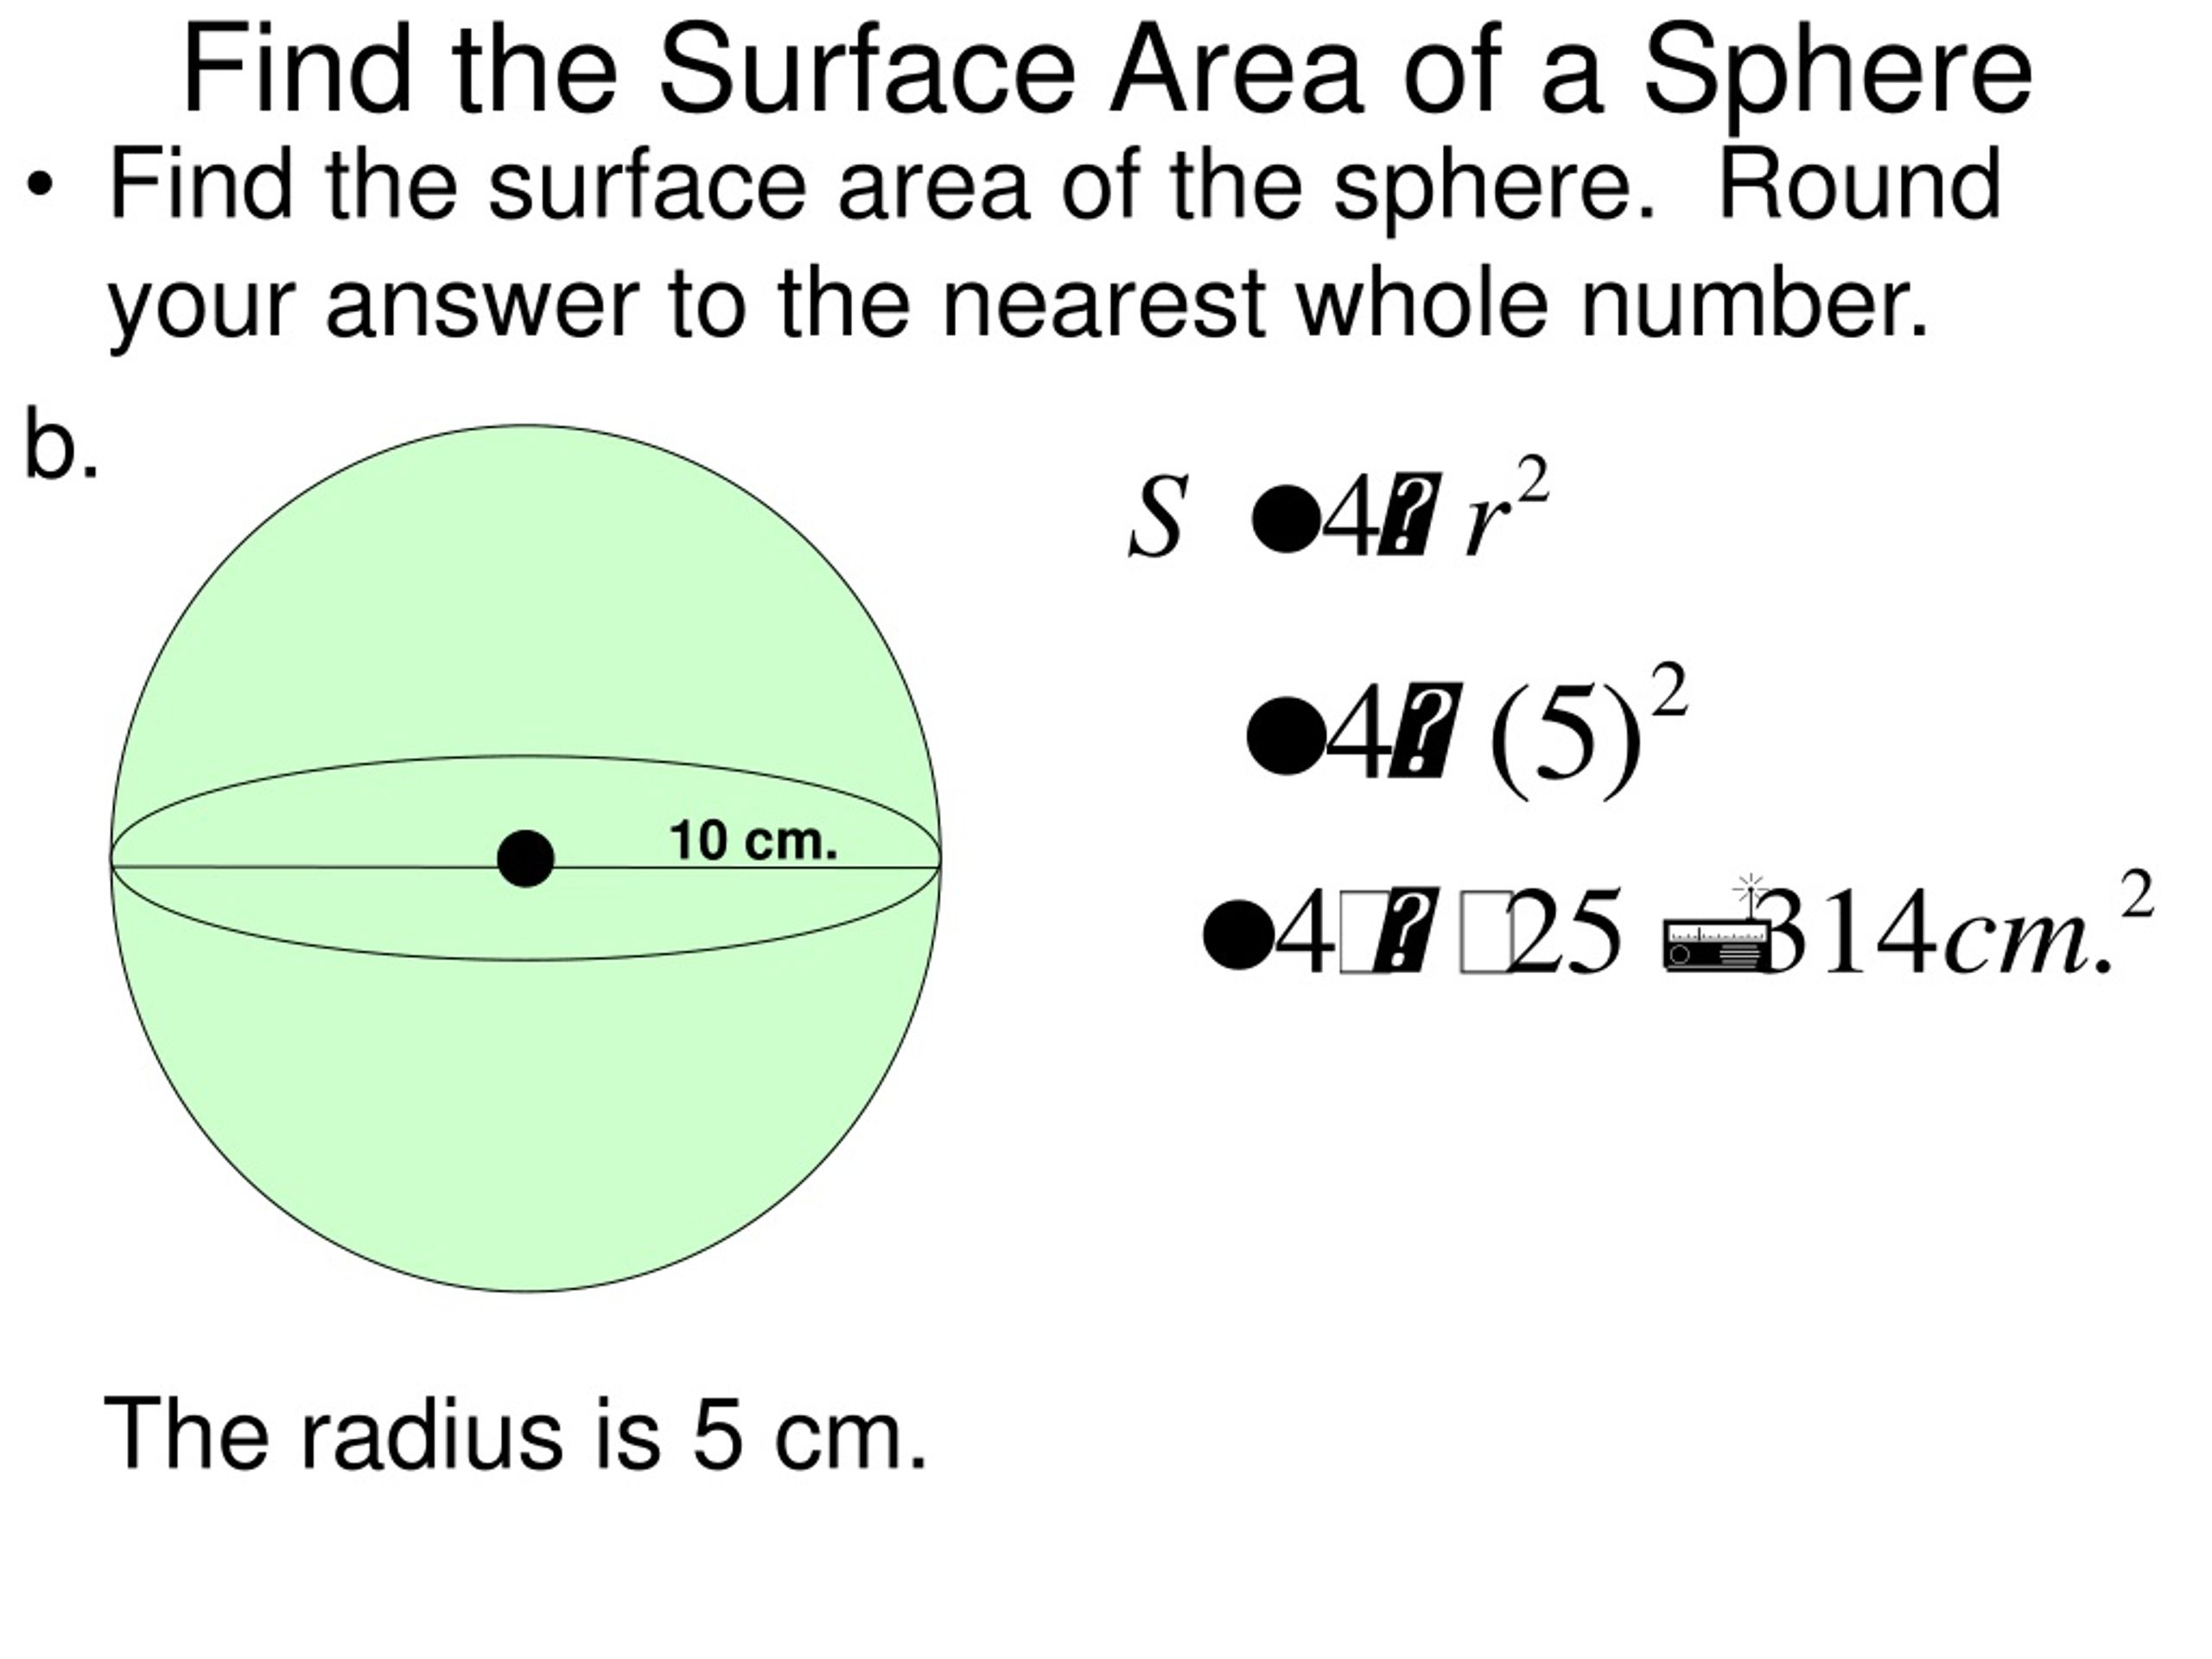 PPT - 21.21 Surface Area and Volume of Spheres 21/21/21 PowerPoint